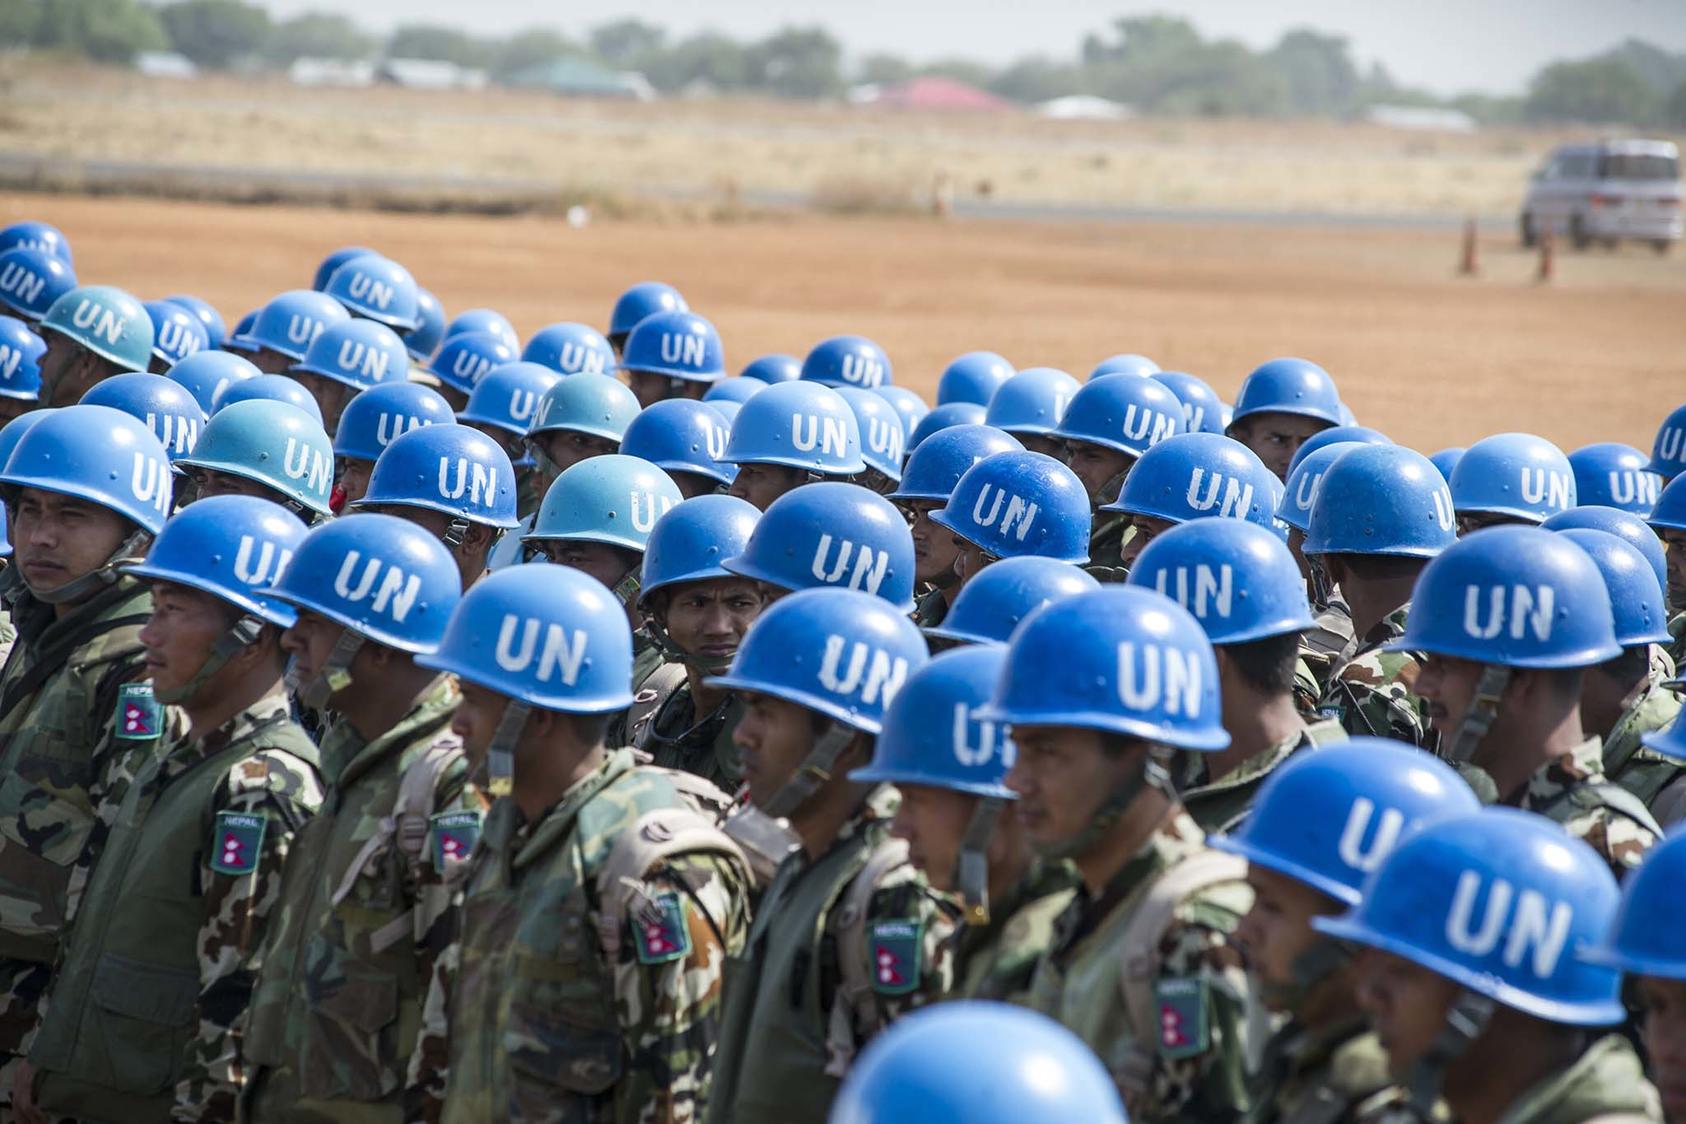 Over 200 Nepalese peacekeepers arrive in Juba from the U.N. Stabilization Mission in Haiti to reinforce the military component of the U.N. Mission in South Sudan, Feb. 4, 2014. (U.N. Photo/Isaac Billy)